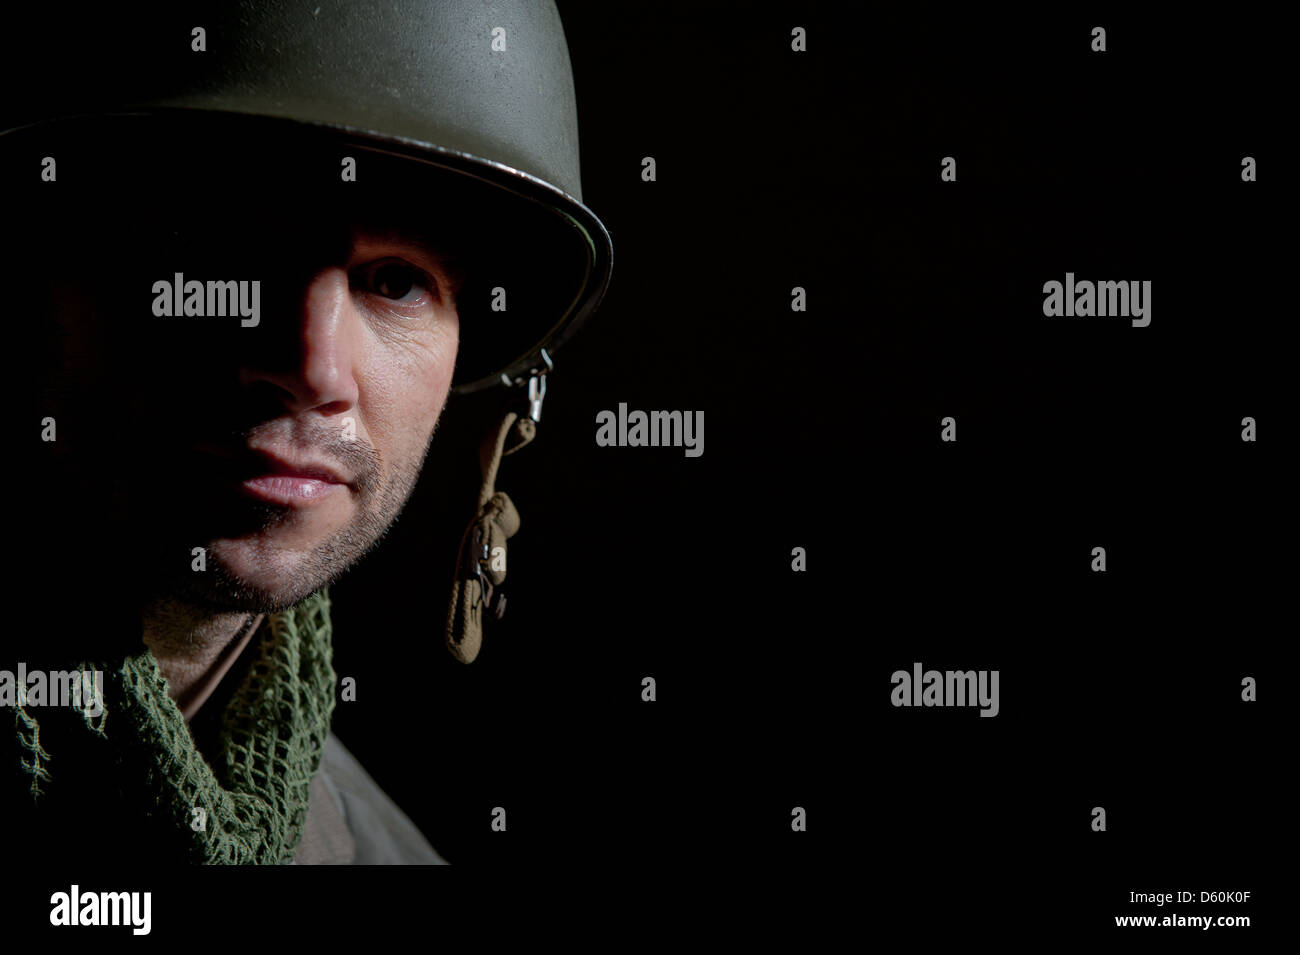 Shell shock soldier ww2 hi-res stock photography and images - Alamy